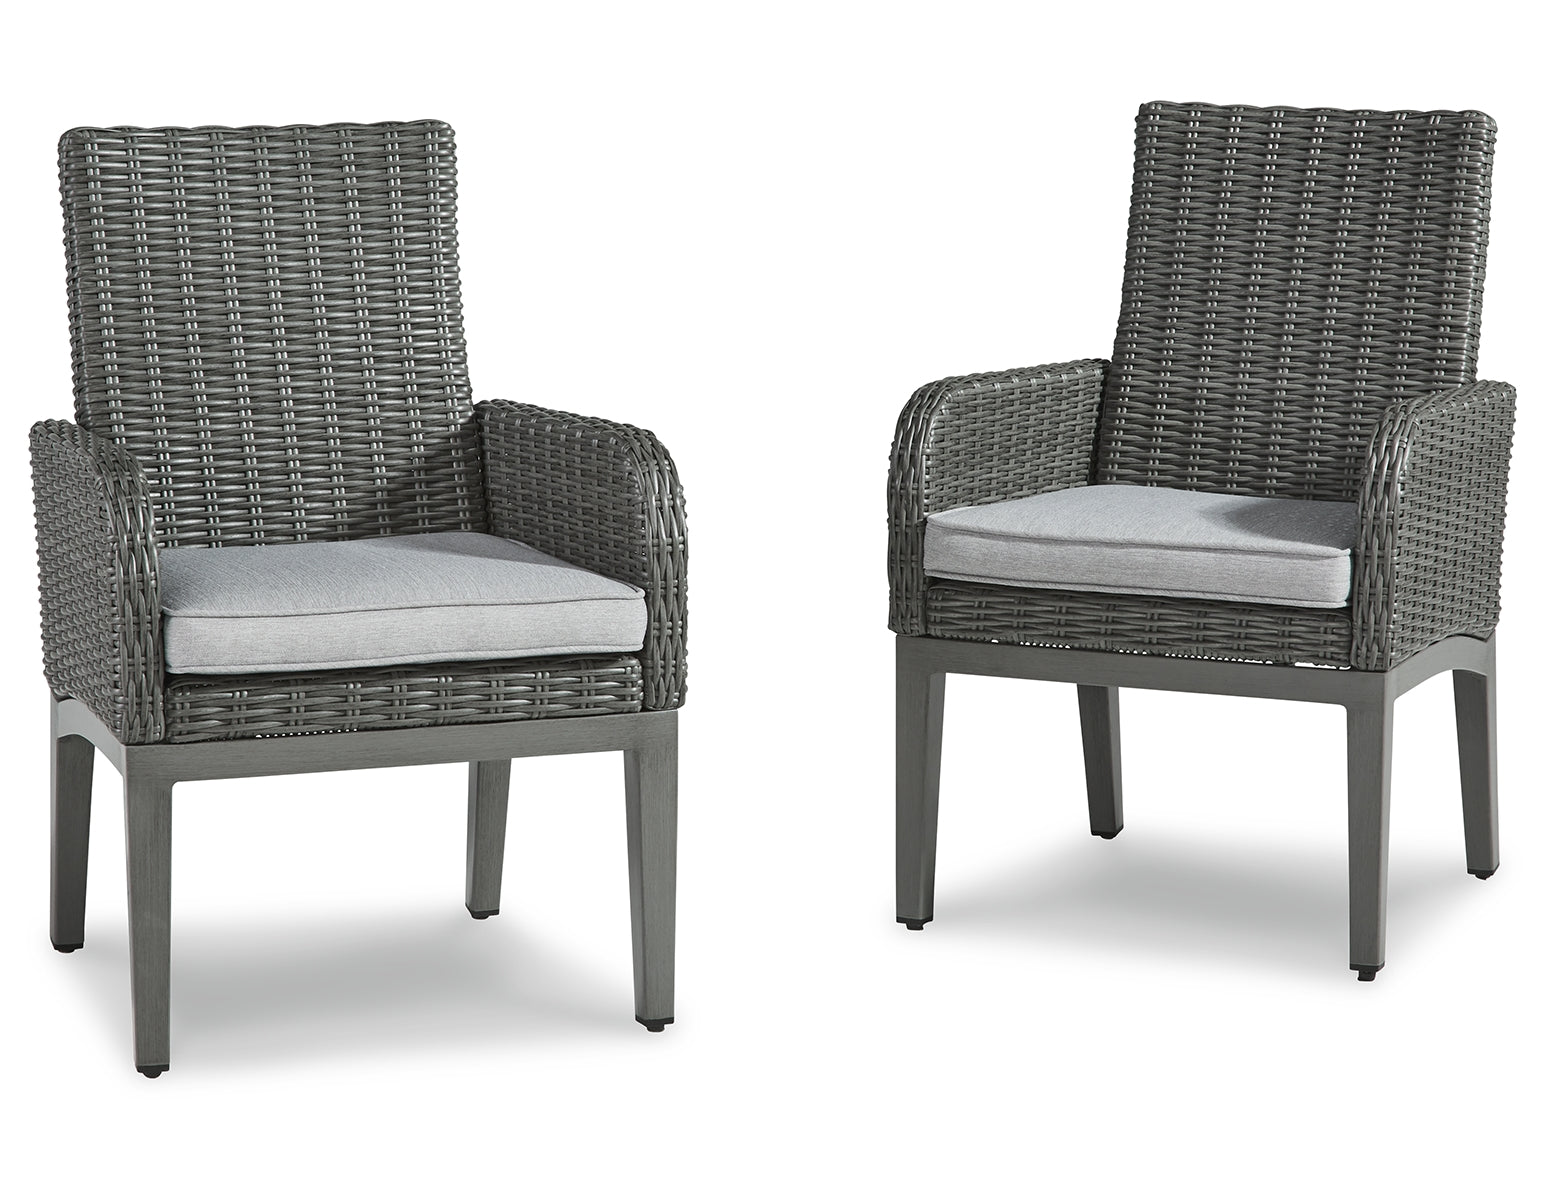 Elite Park Arm Chair with Cushion (Set of 2)